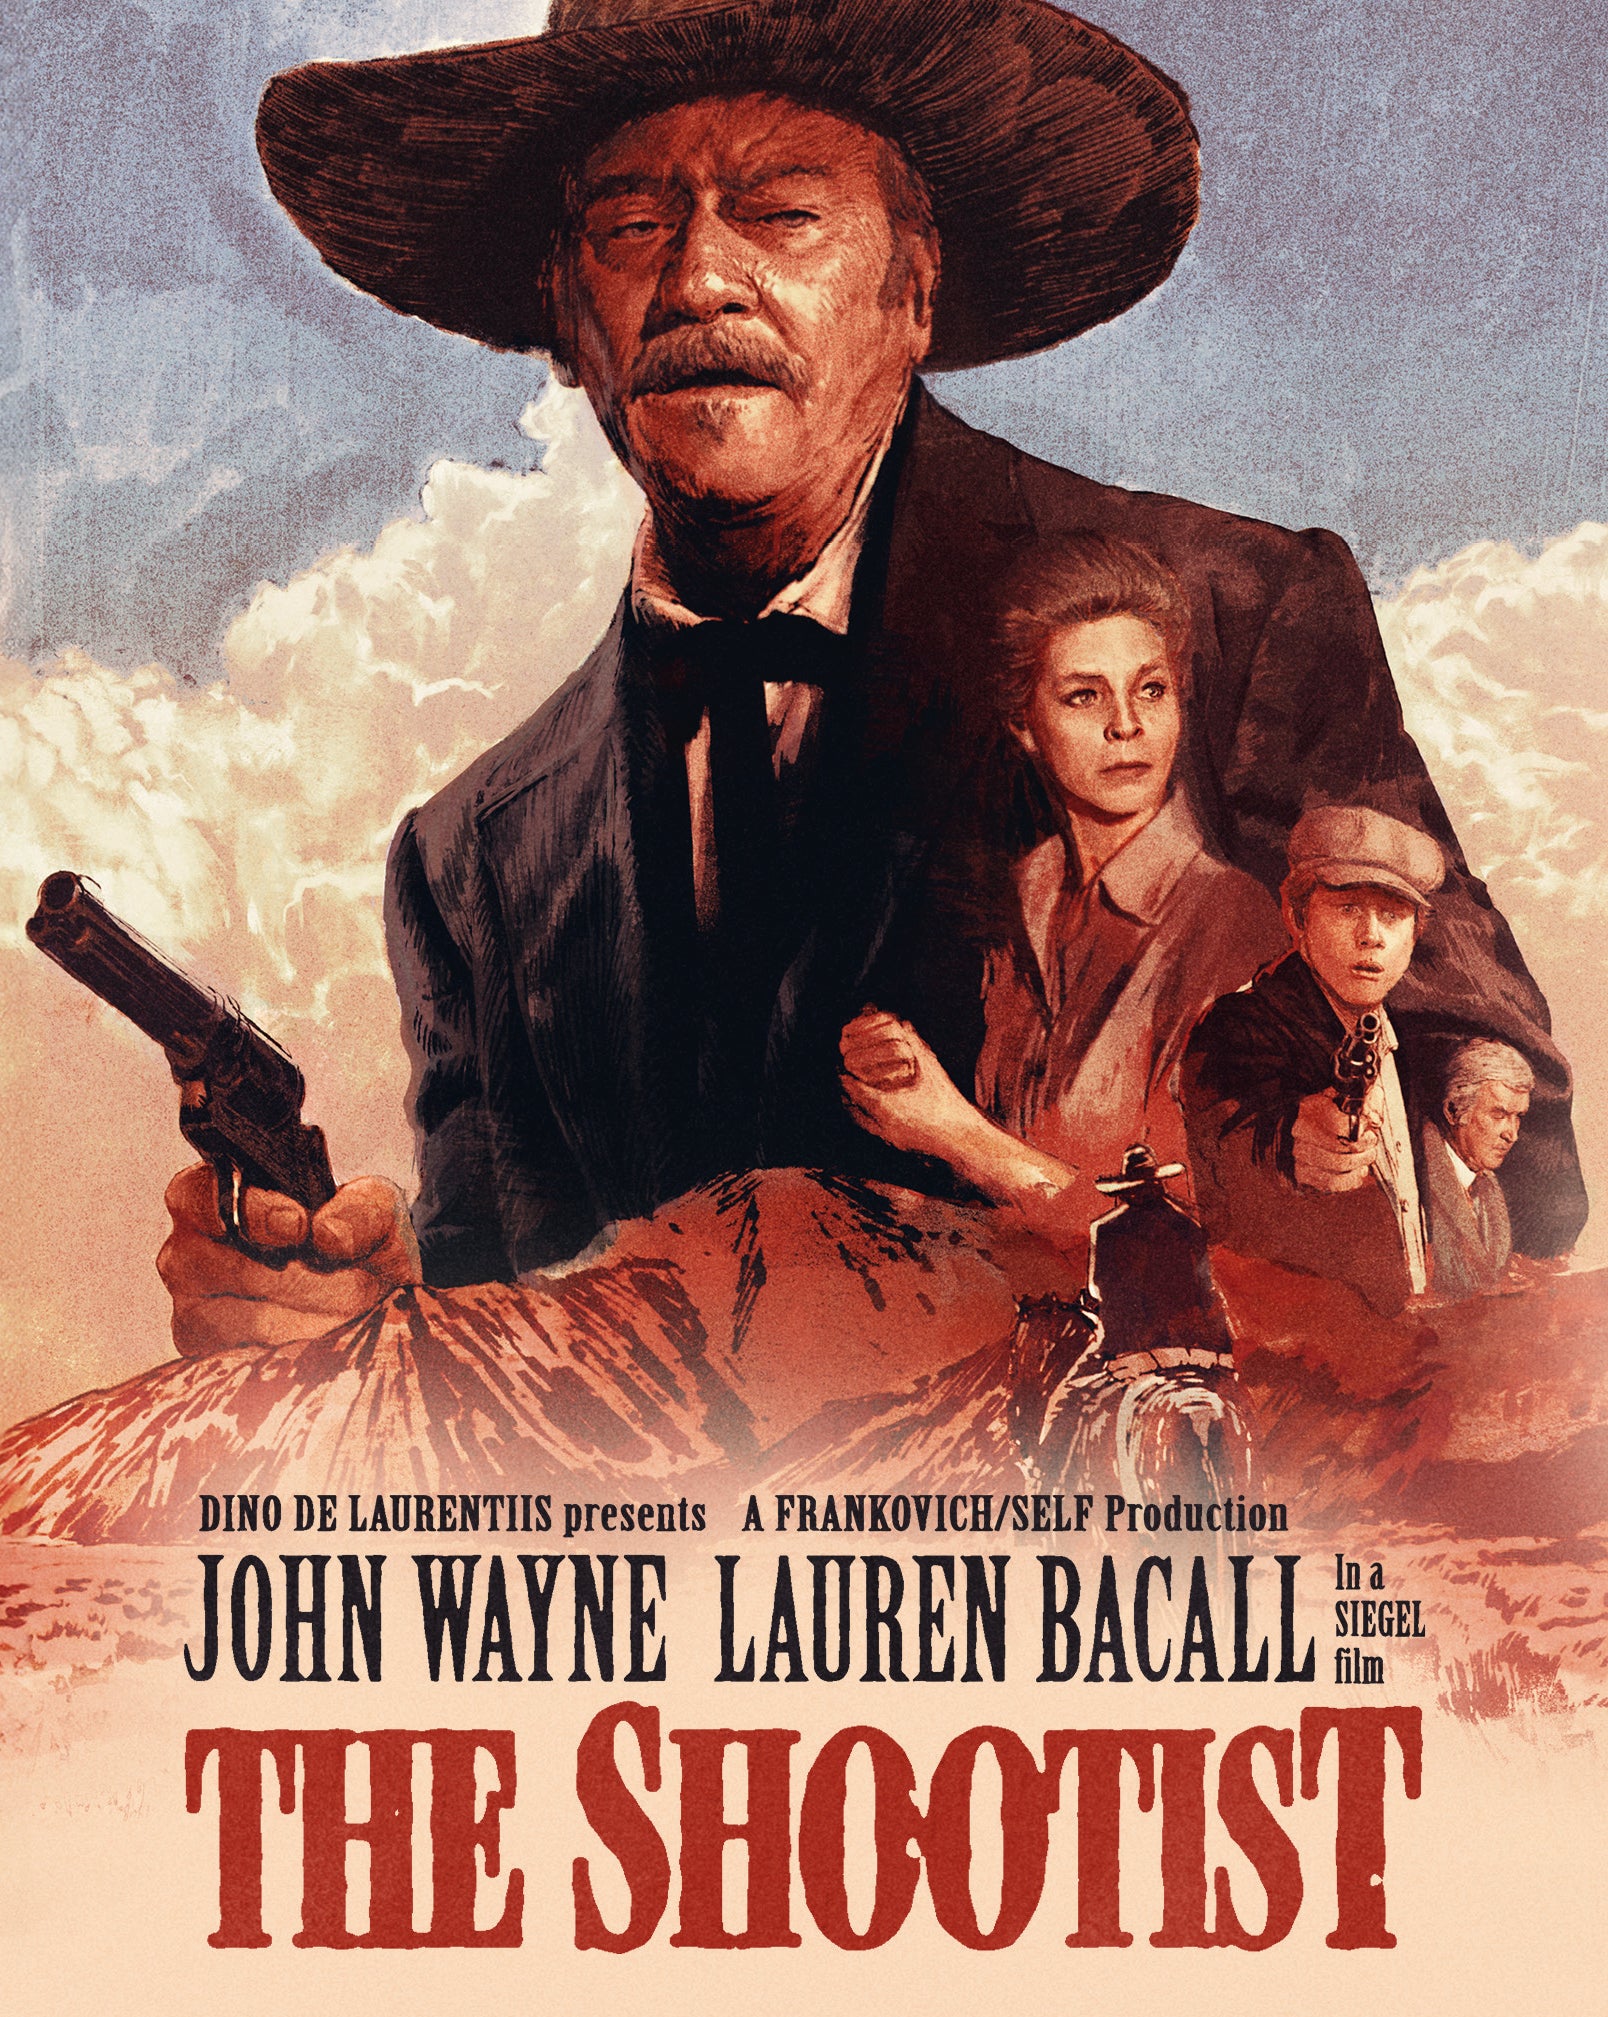 THE SHOOTIST (LIMITED EDITION) BLU-RAY [PRE-ORDER]